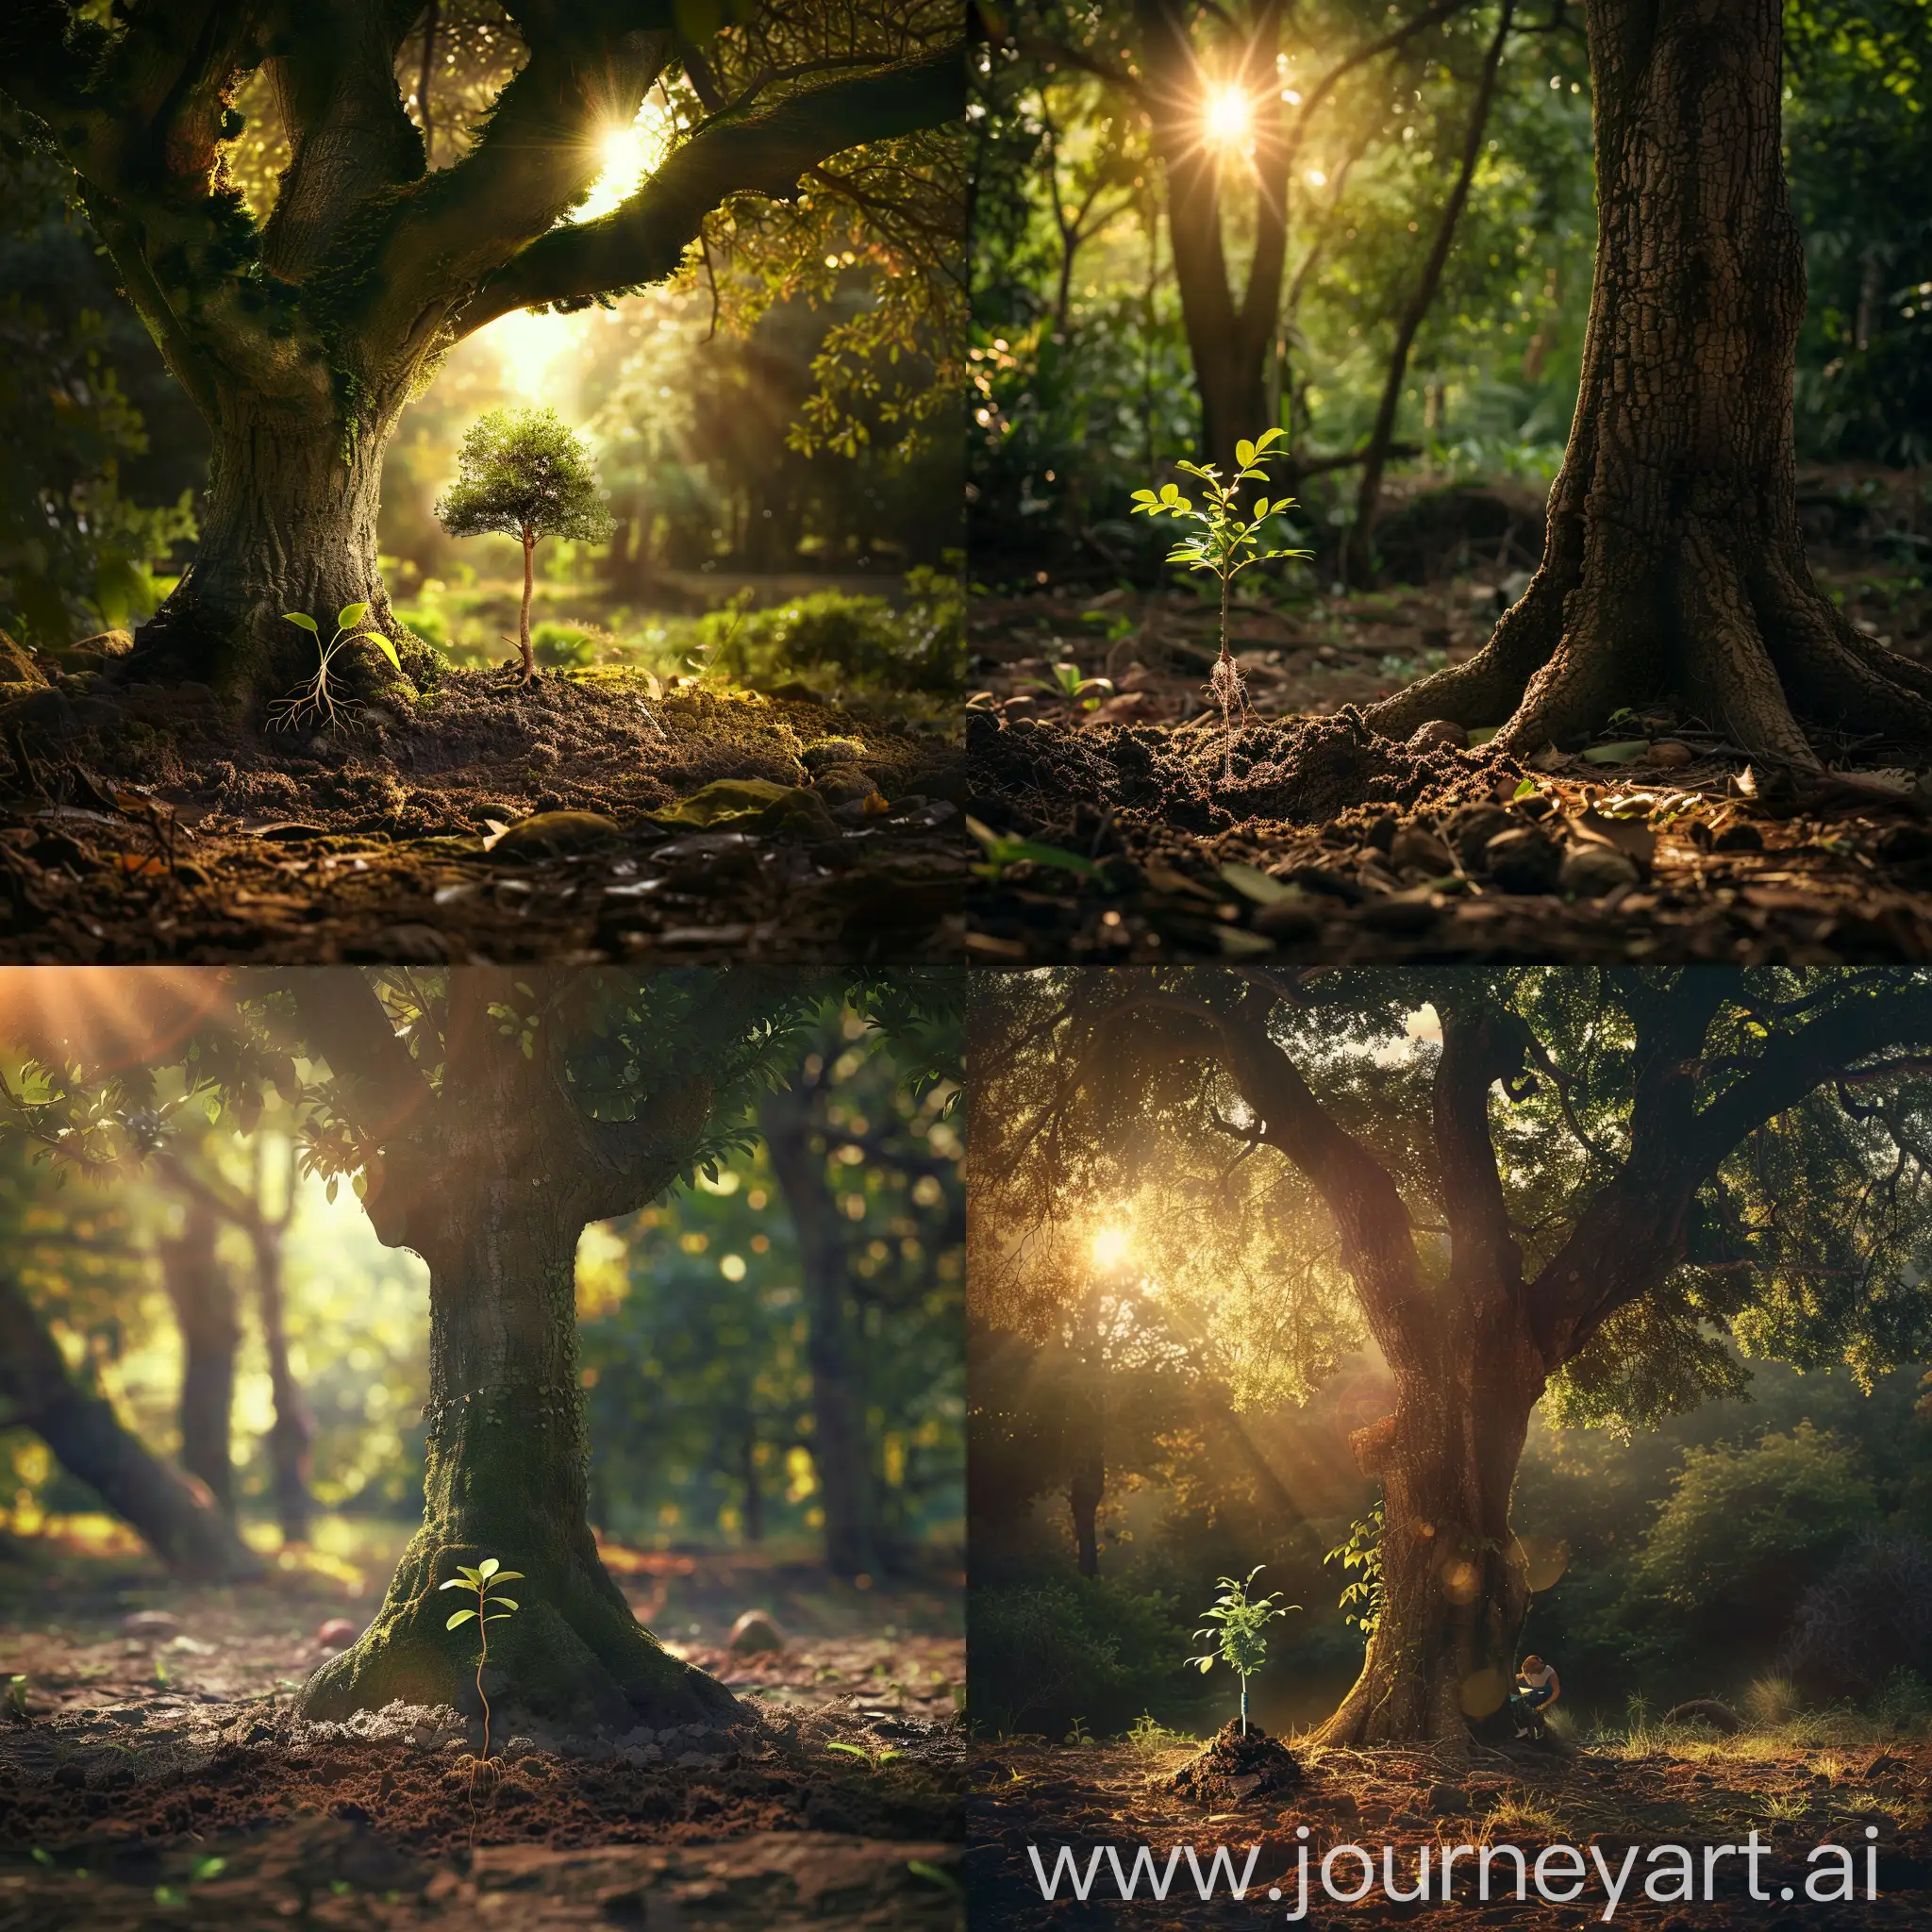 Sunlit-Forest-Scene-Human-Planting-Sprout-Under-Mature-Tree